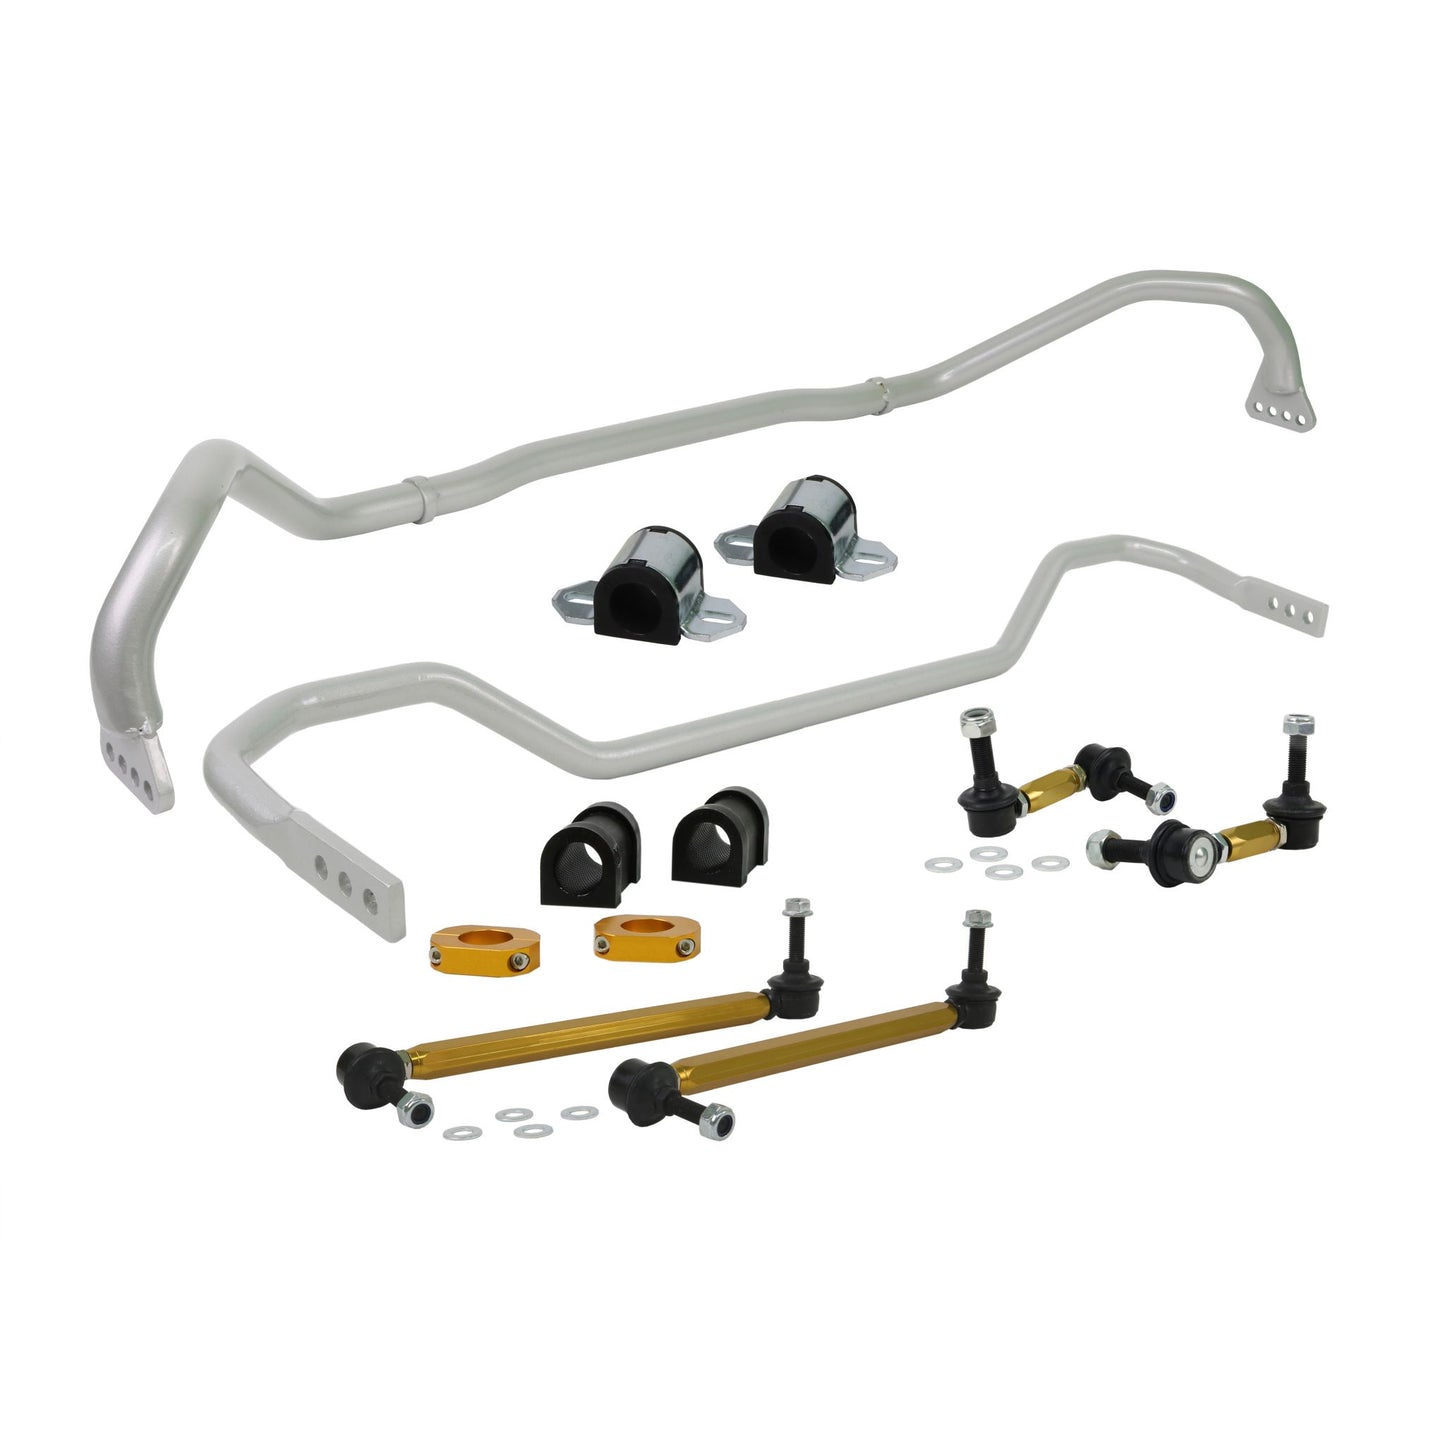 Whiteline BHK008 Front (30mm) and Rear (22mm) Swaybar Kit; fits Pontiac G8 08-09